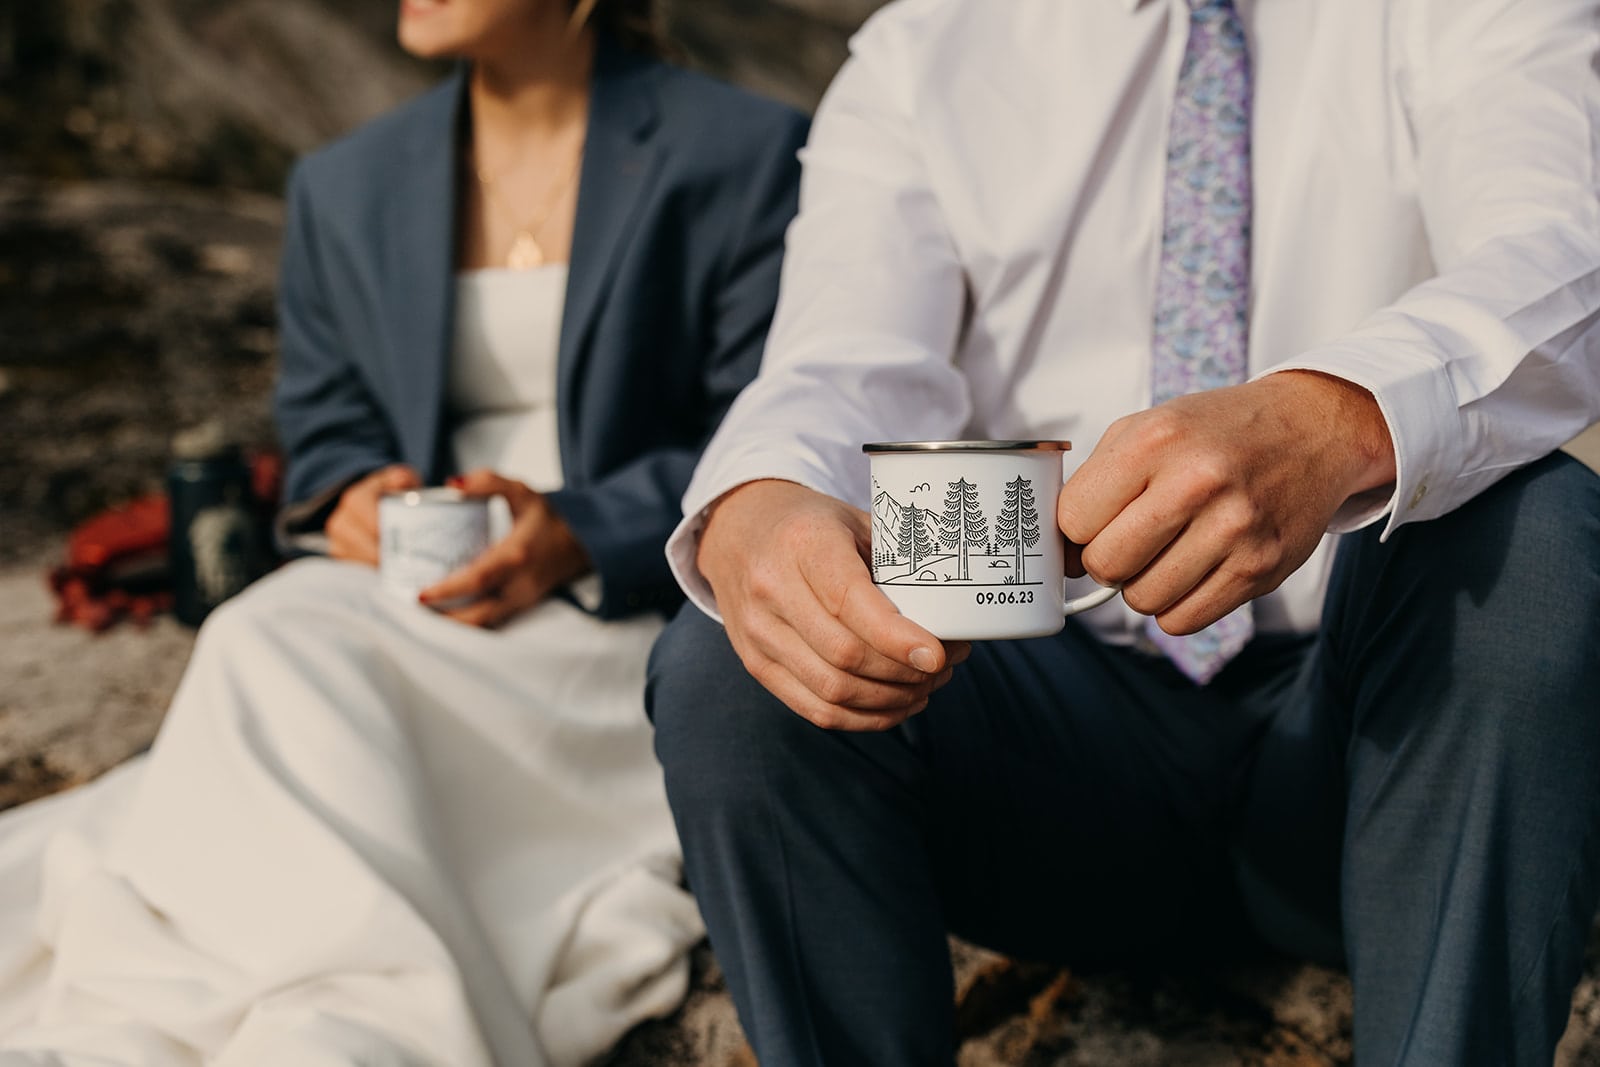 The couple enjoys coffee in their camp mugs.